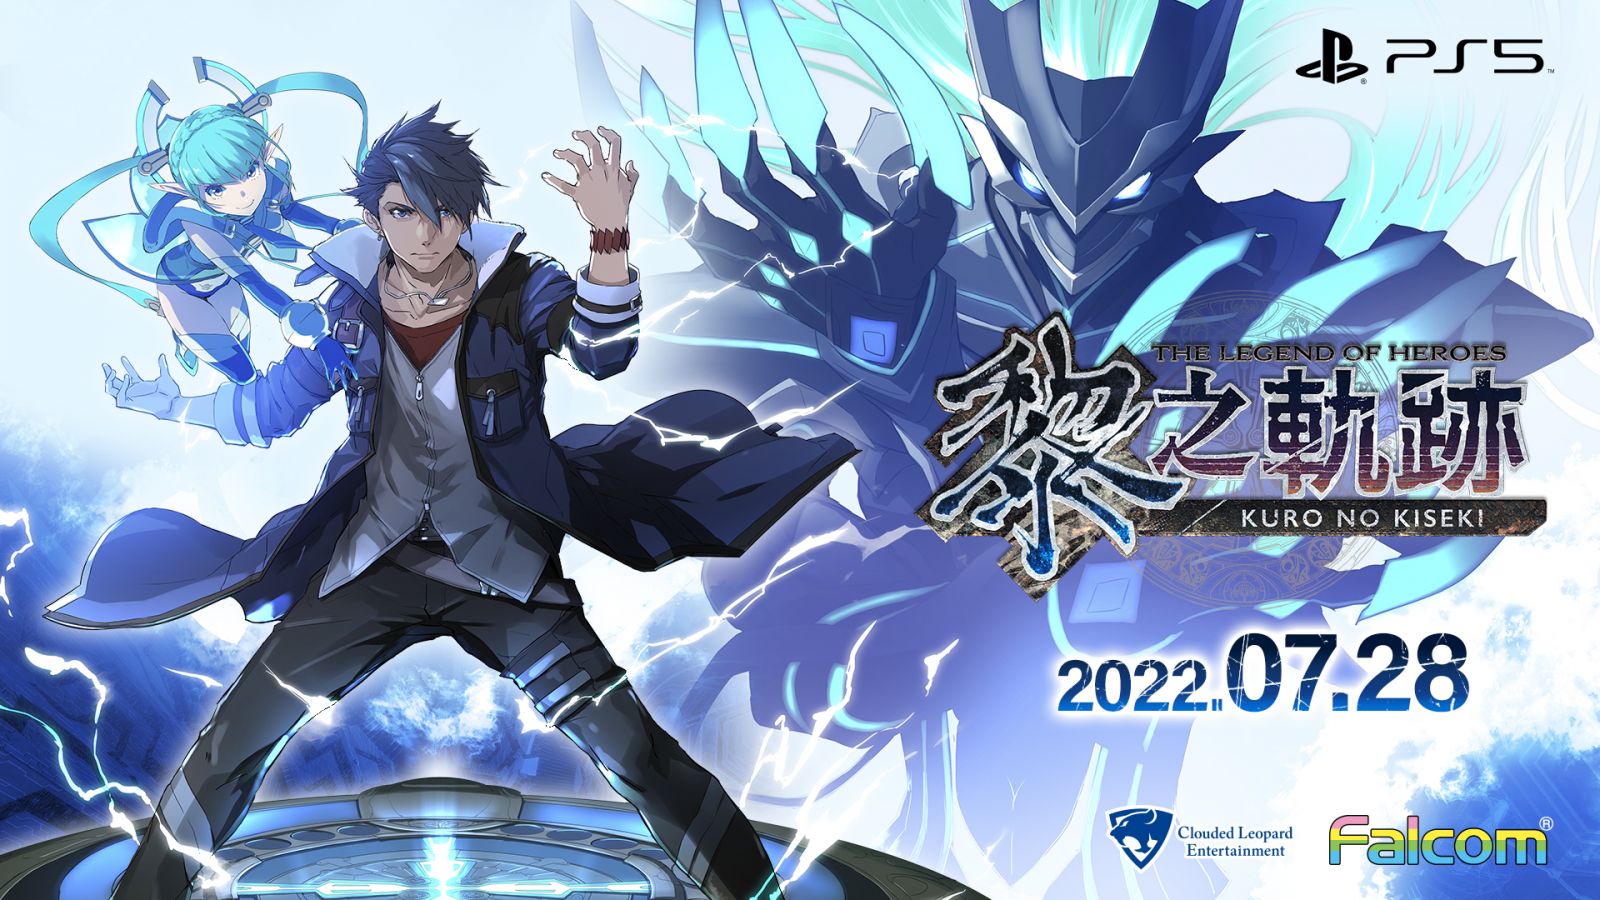 Coming to PlayStation®5/Steam® The Legend of Heroes: Kuro no Kiseki  Traditional Chinese & Korean Versions to be released on July 28, 2022! |  Clouded Leopard Entertainment(CLE) Official Site